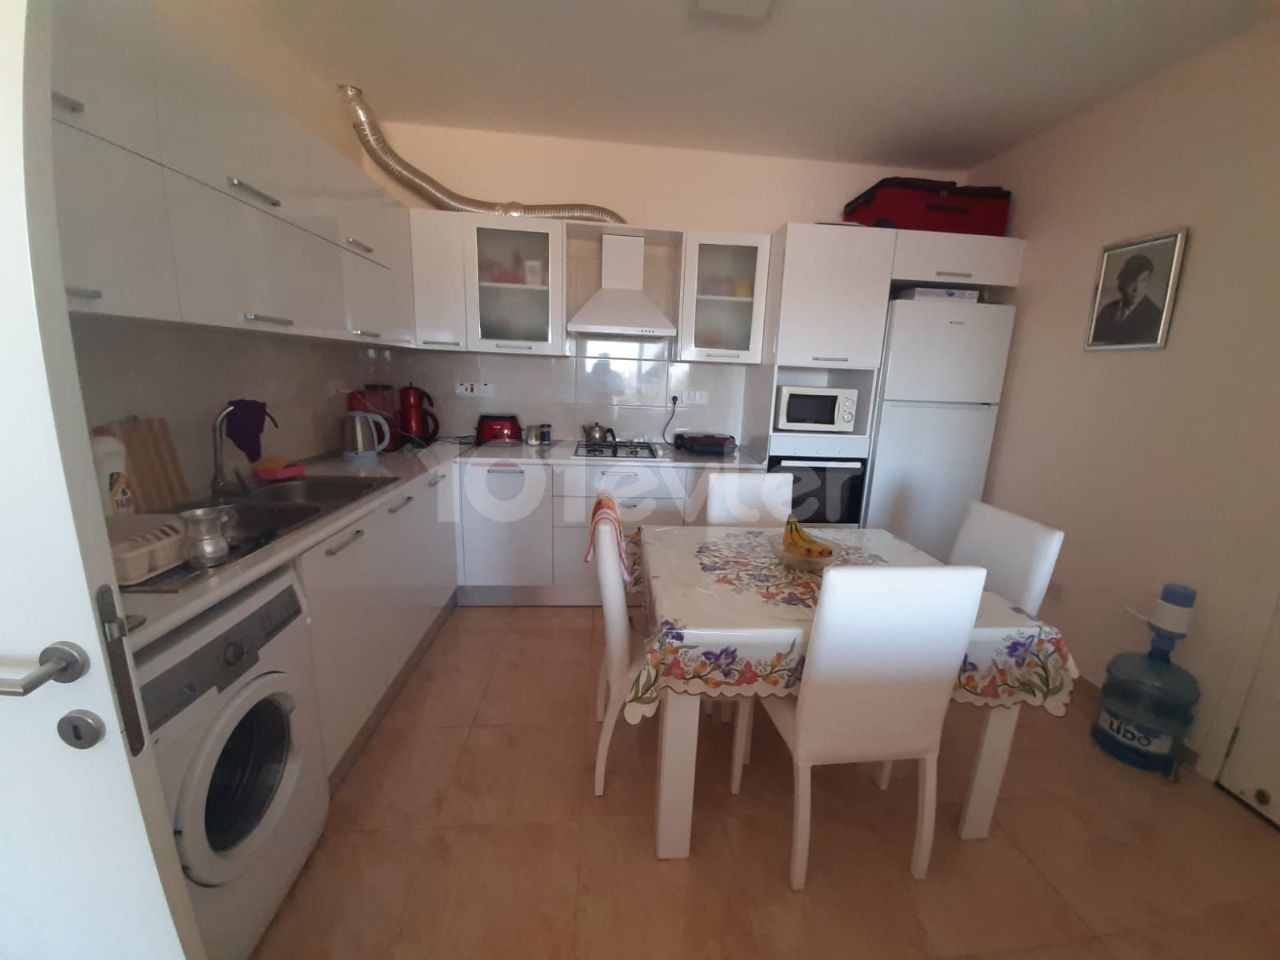 2+1 fully furnished flat for sale in a site with a pool in Yeniboğazi, 78,000 STG equivalent INVESTMENT OPPORTUNITY 80 SQUARE METERS ON THE 3RD FLOOR.